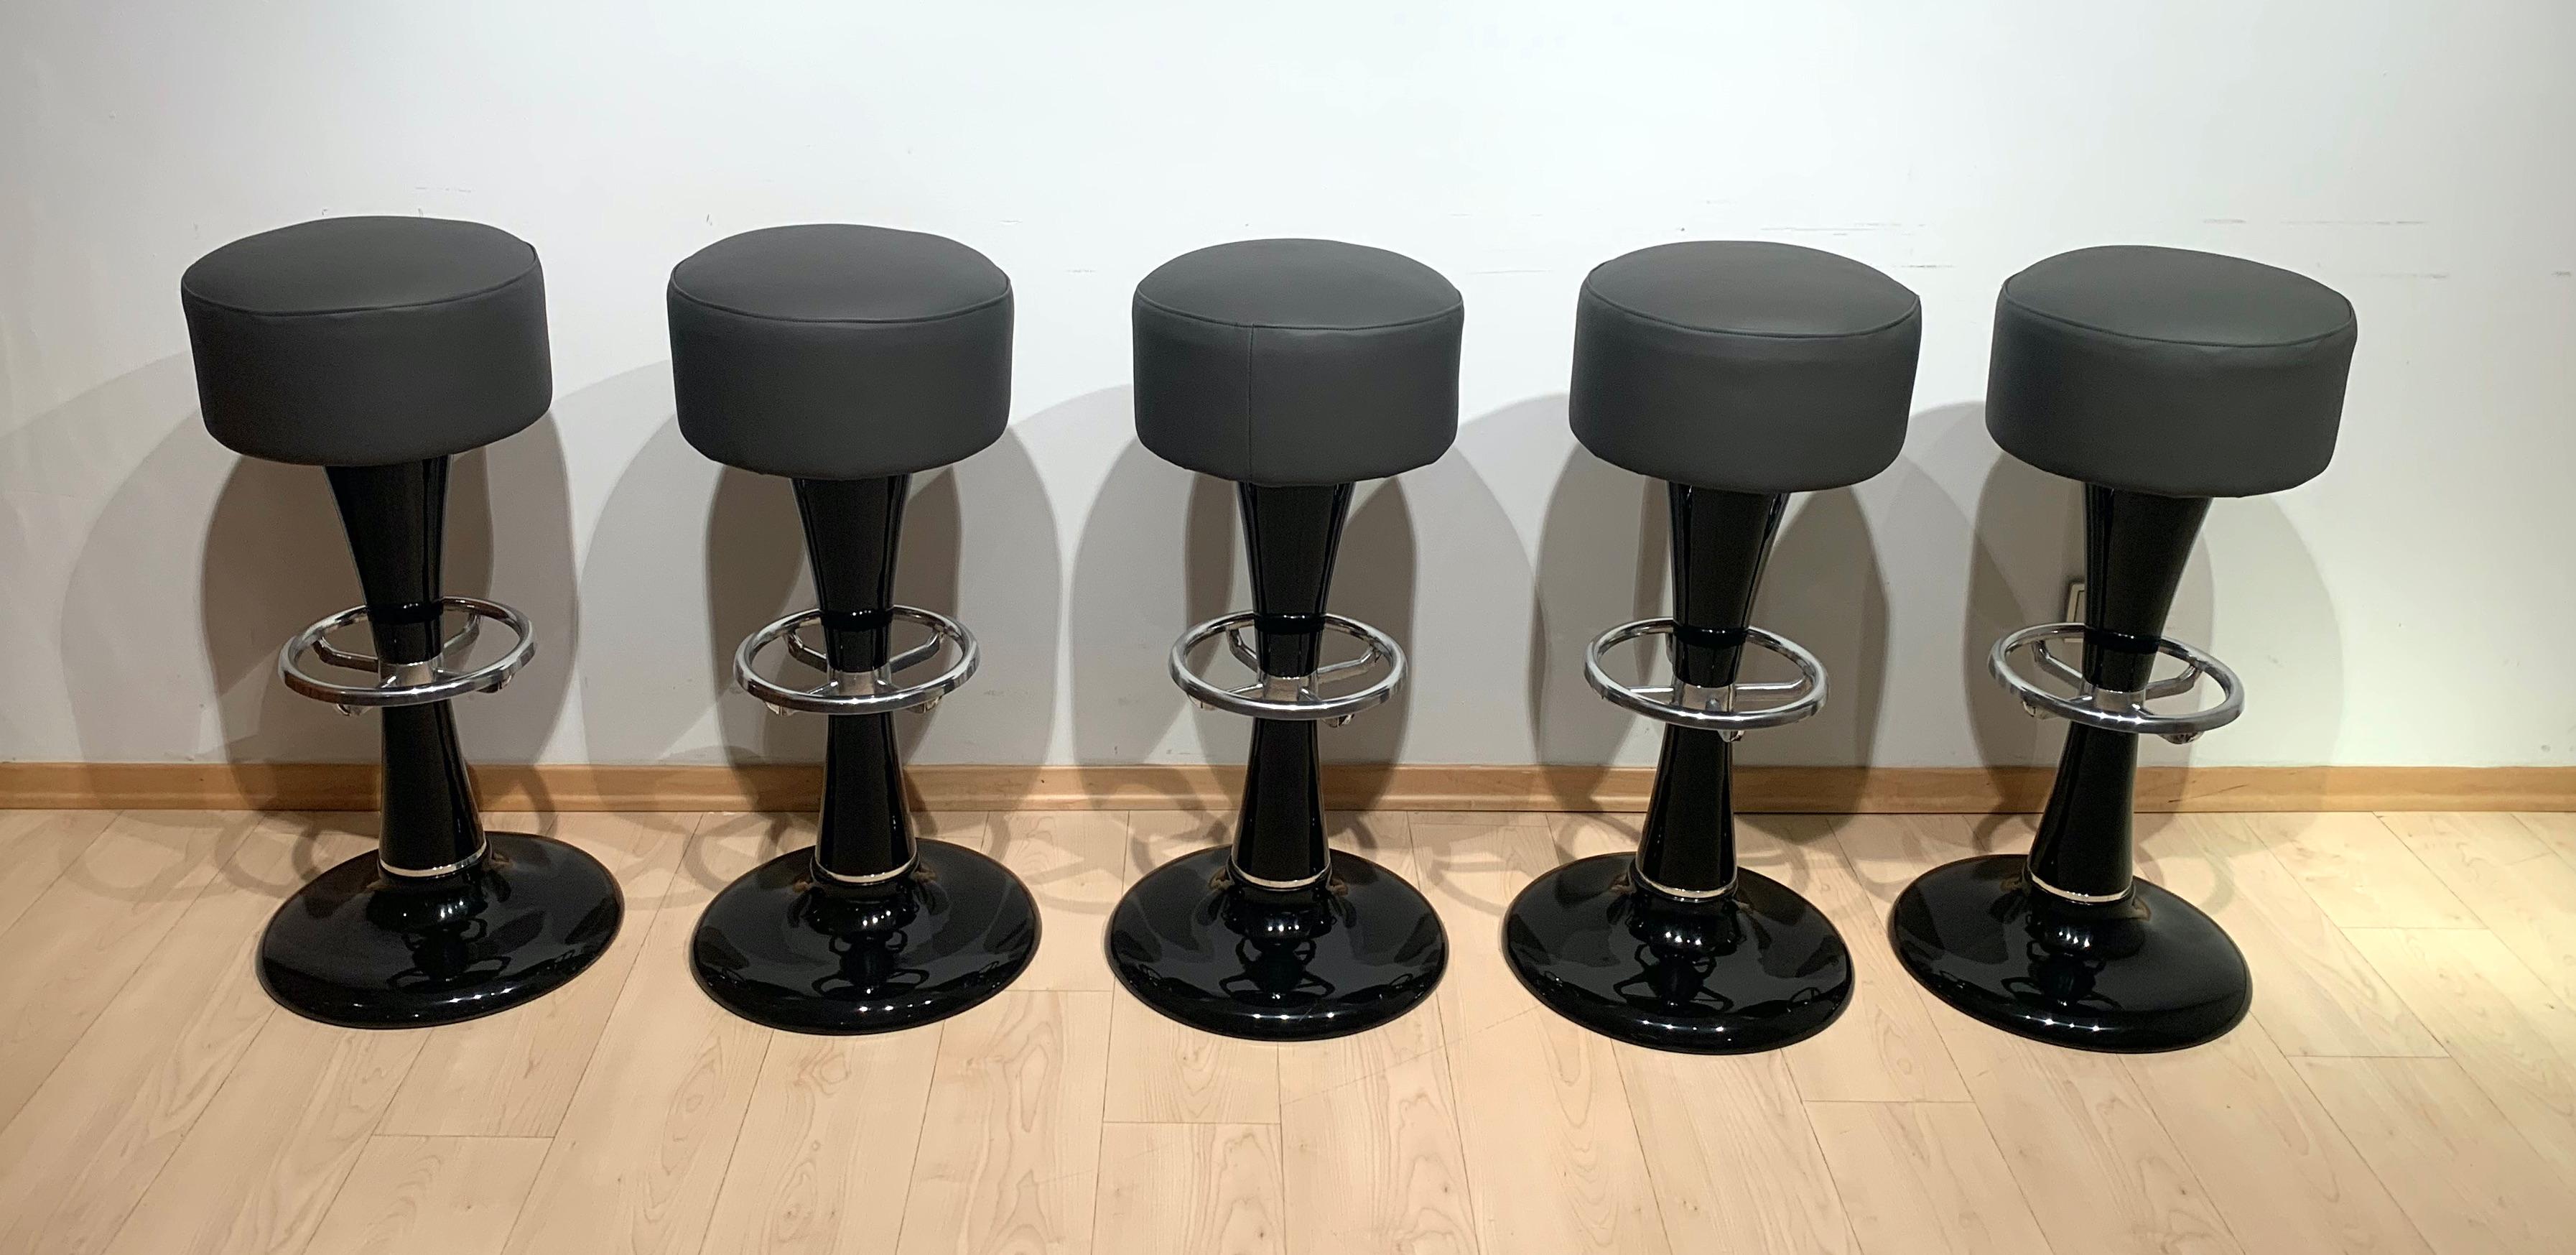 French Metal Barstools, Black Lacquer, Chrome, Grey Leather, France, 1950s For Sale